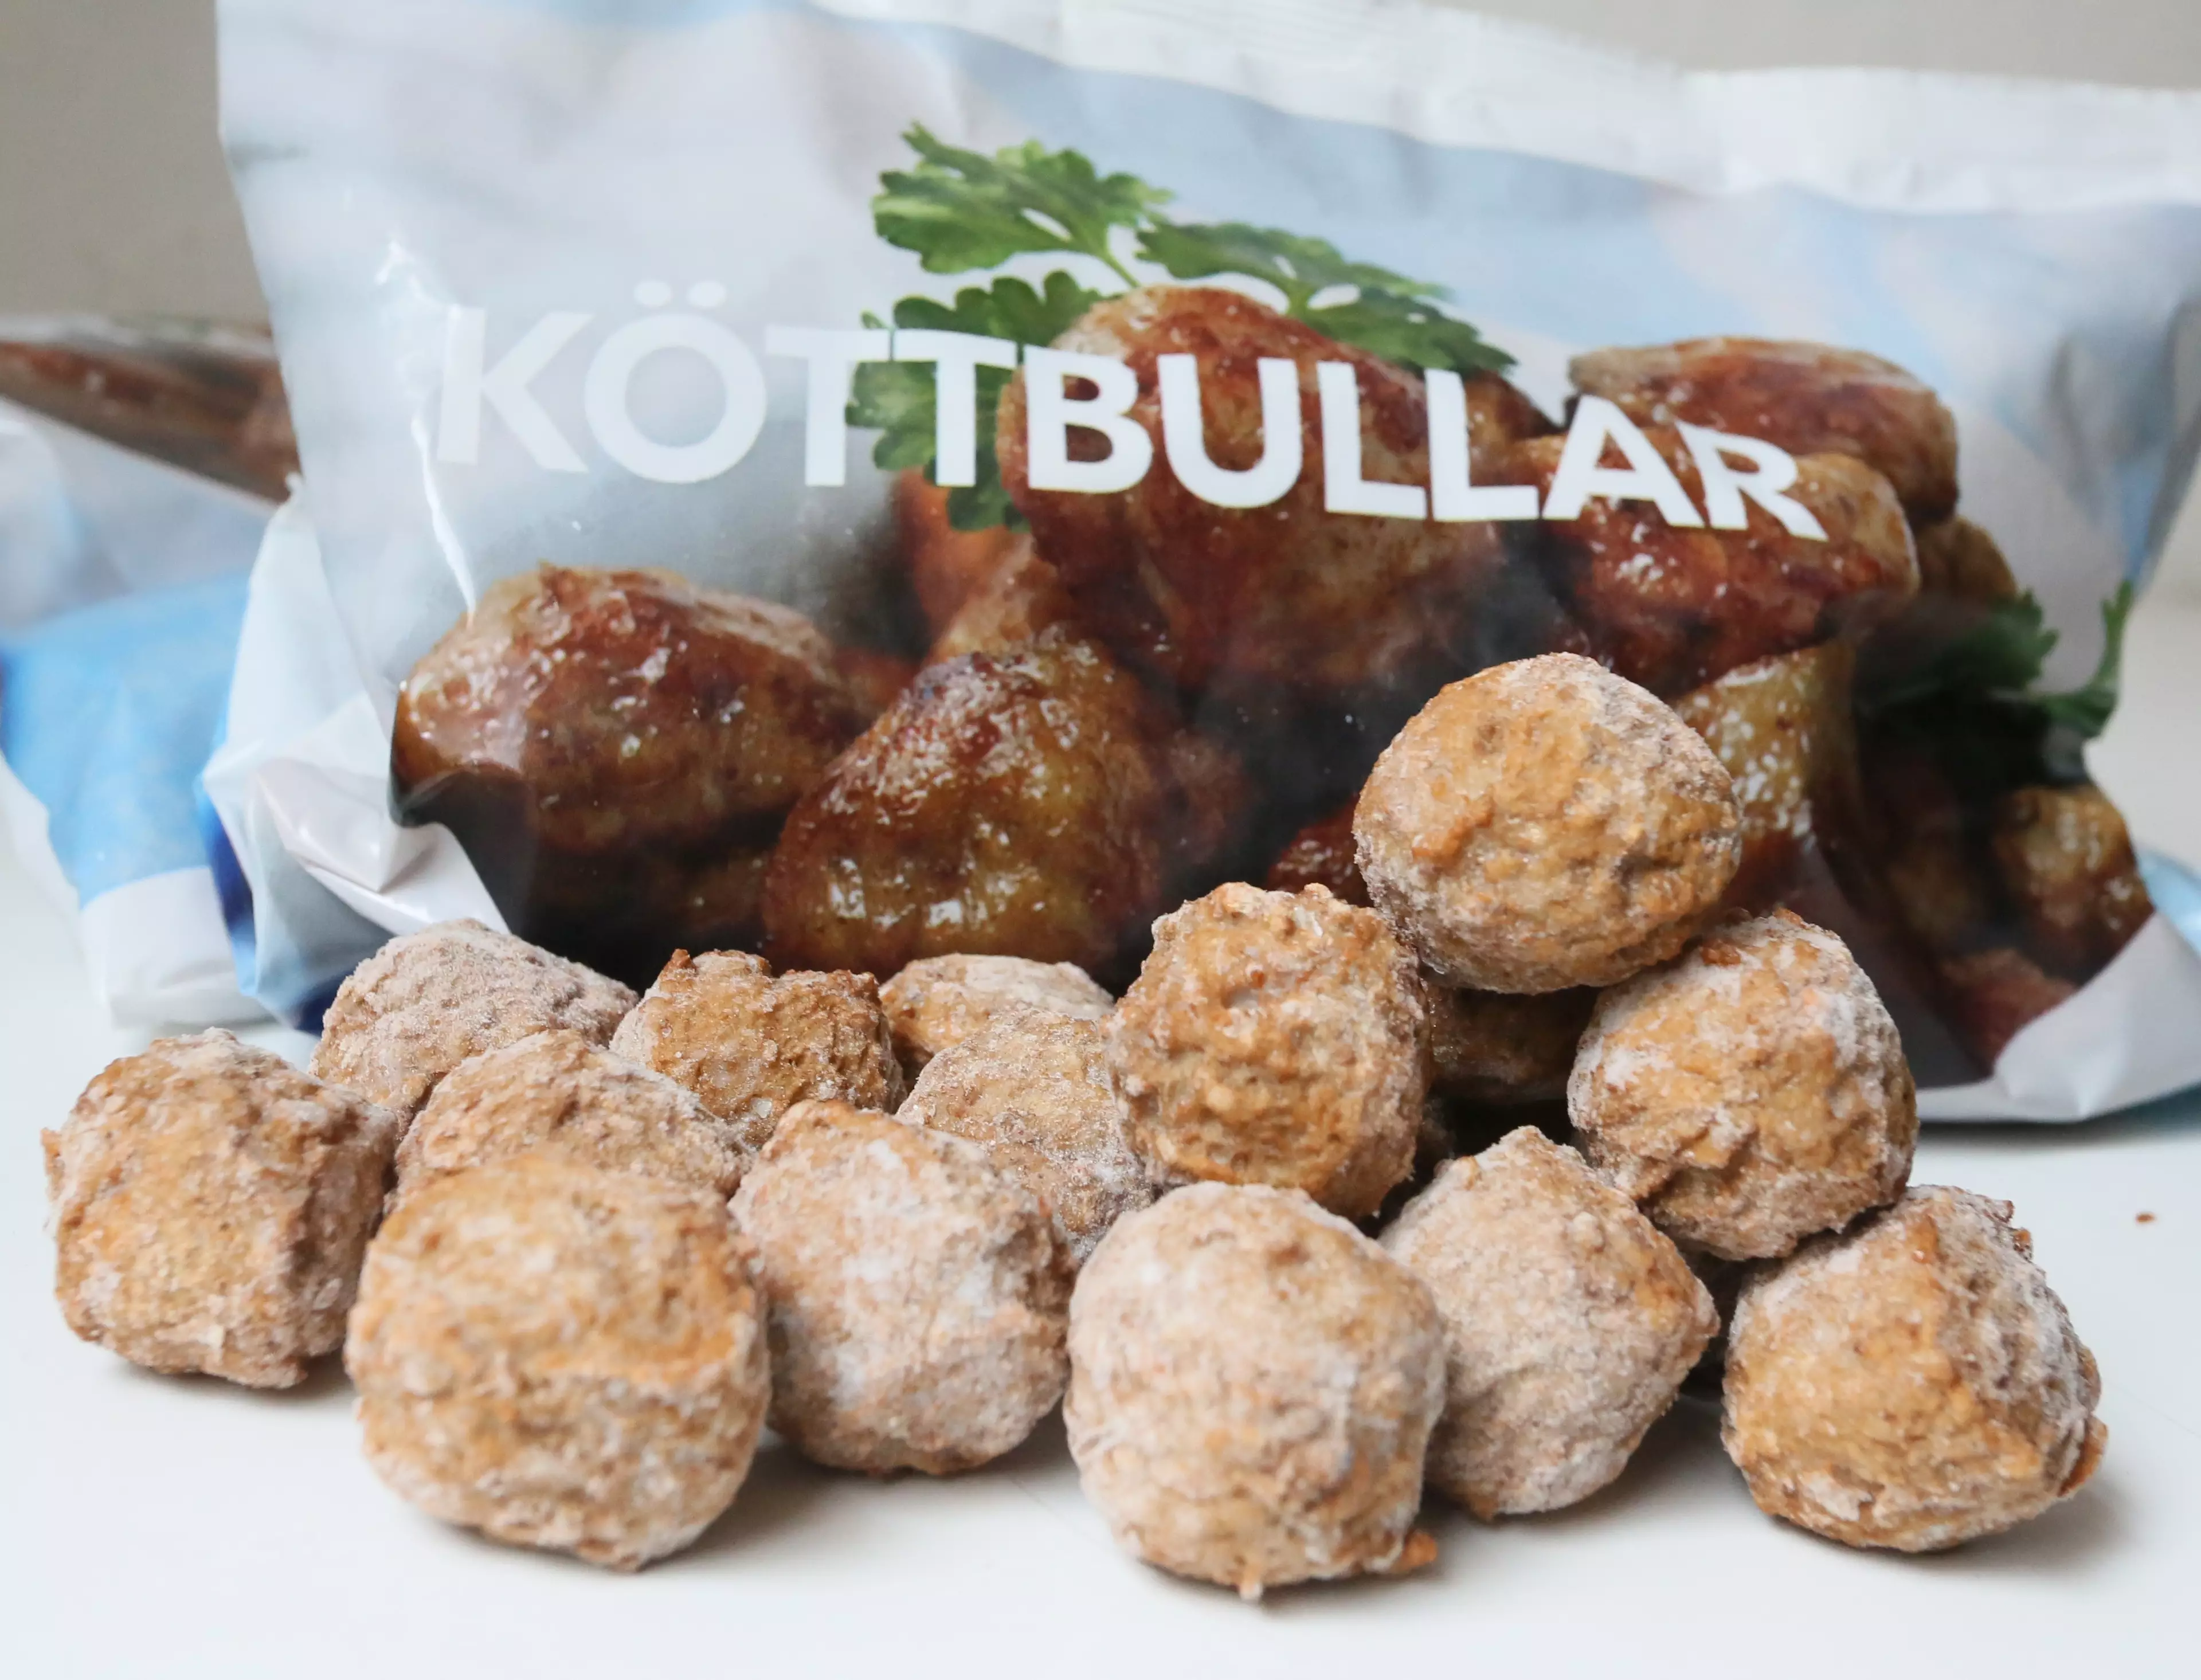 The Swedish giant has announced it will be launching a vegan meatball.